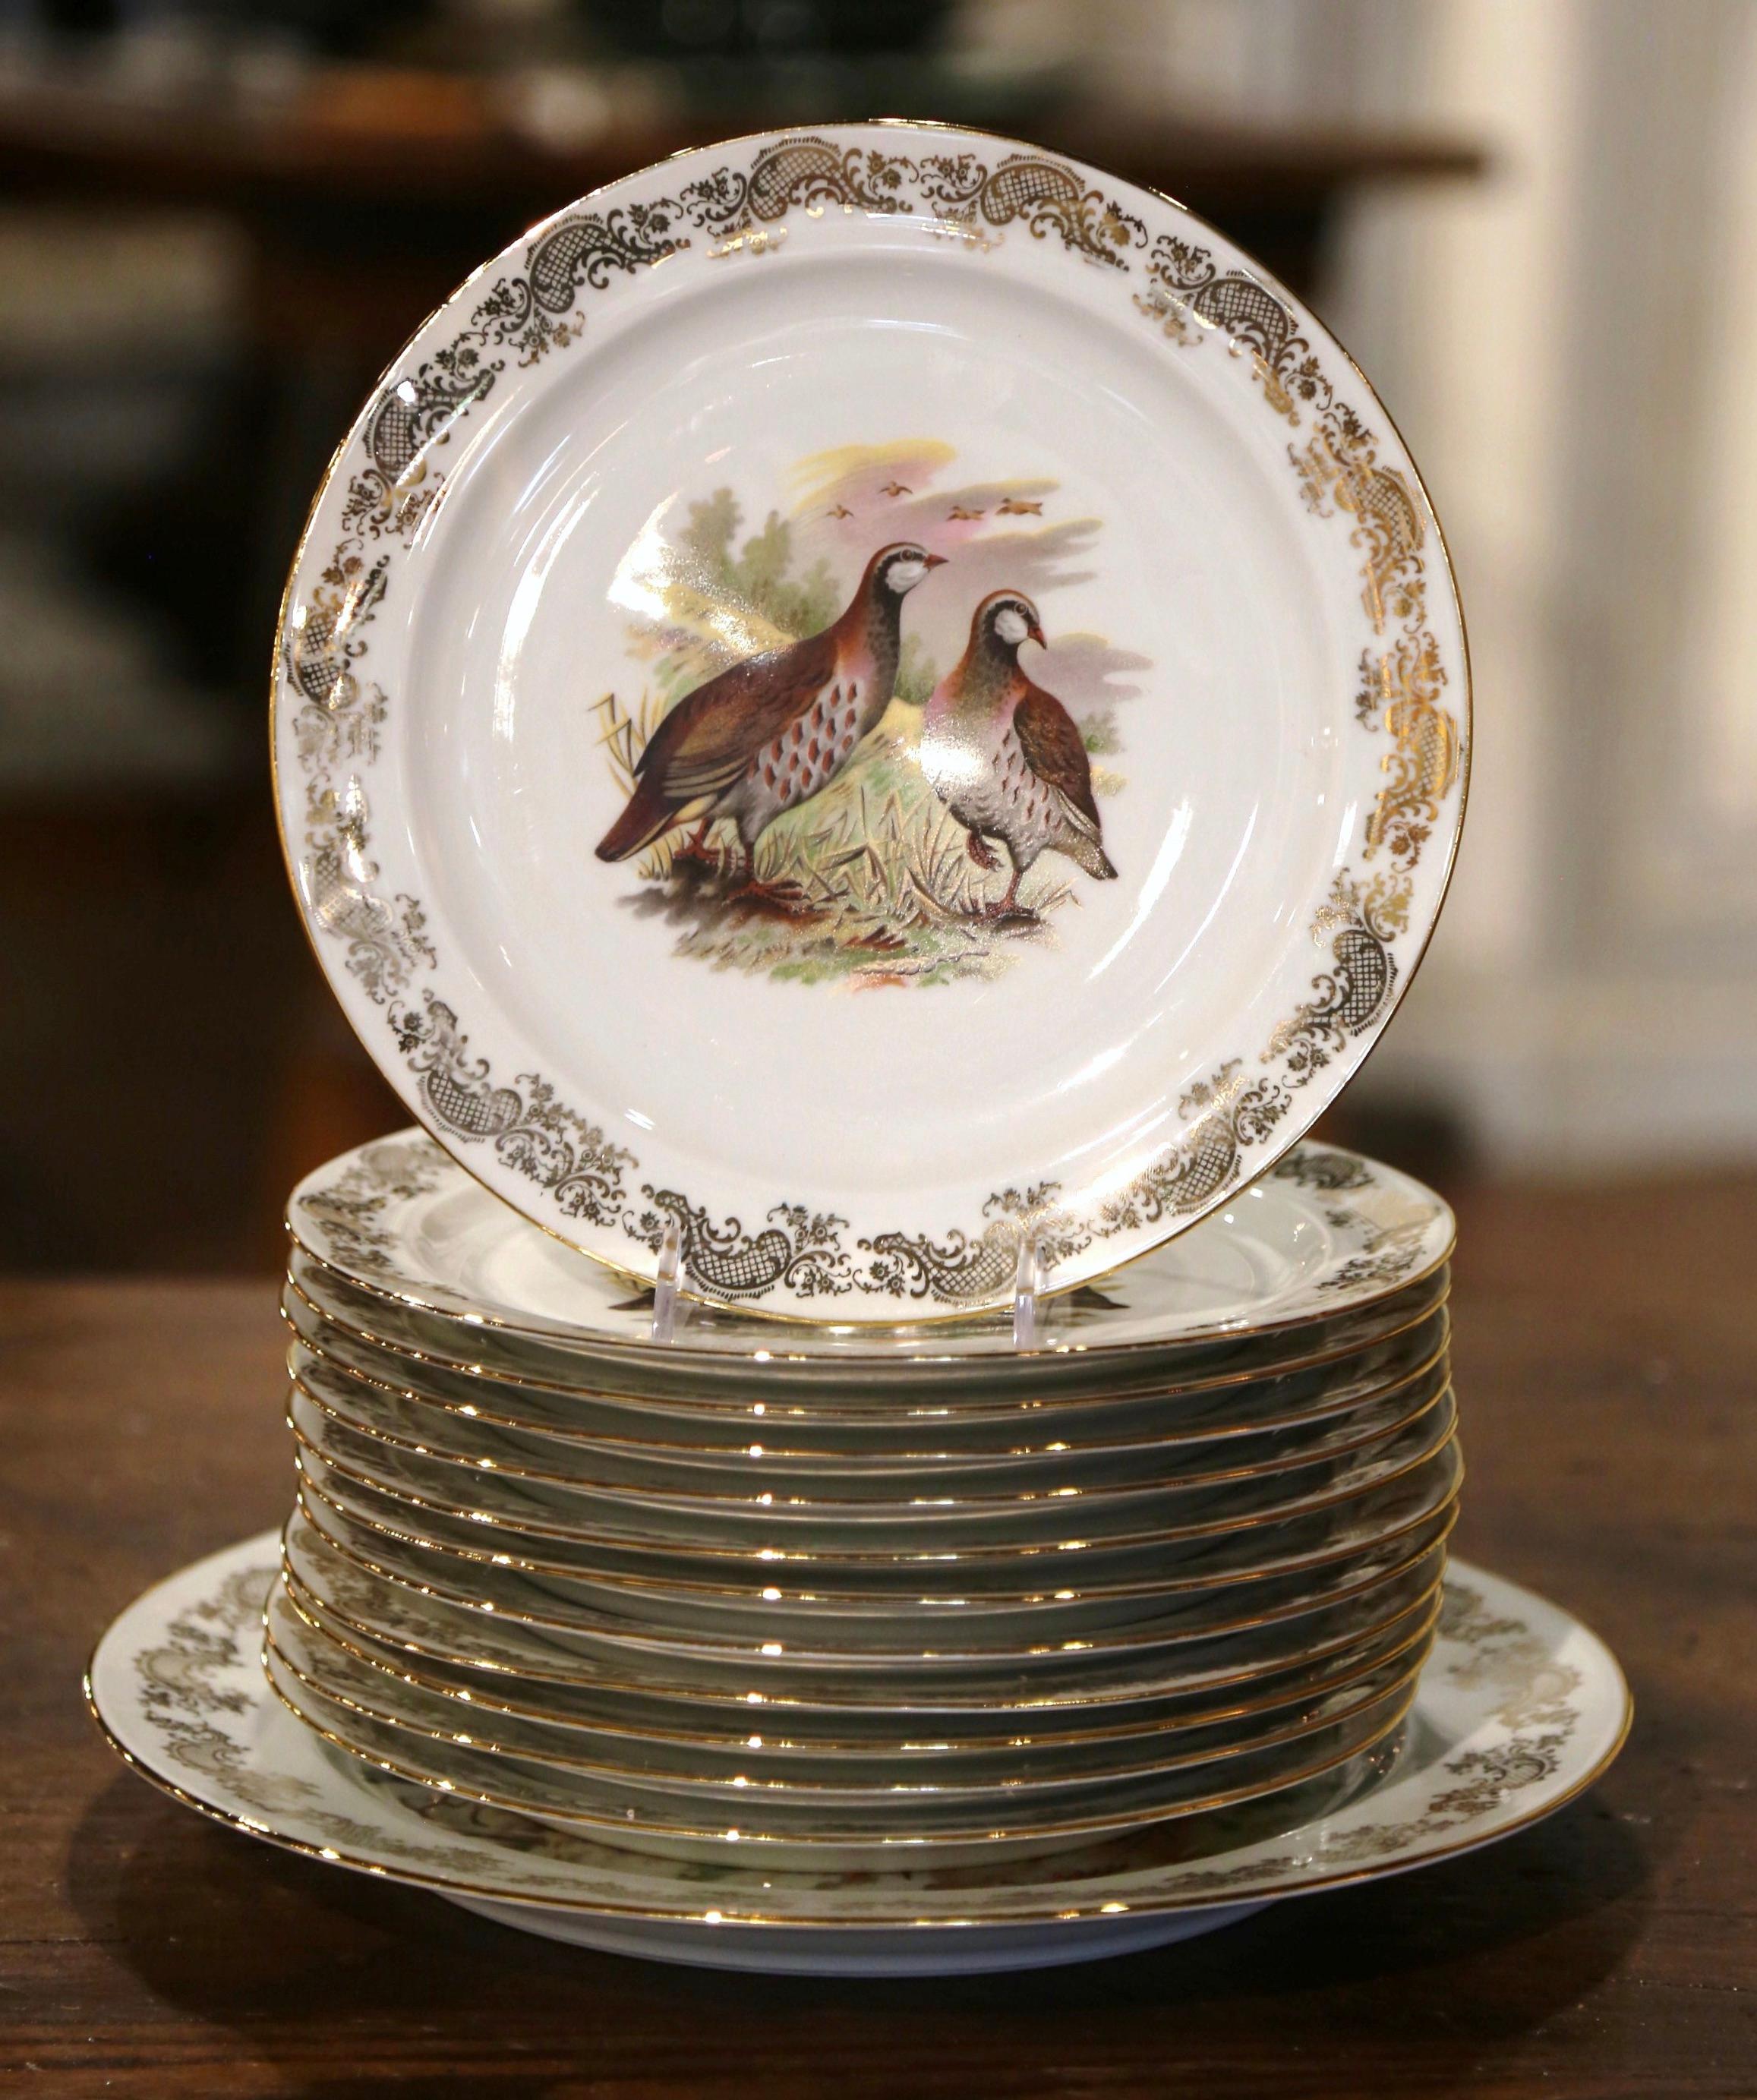 20th Century  French Limoges Porcelain Service with Bird Motifs Signed Benoit - Set of 13